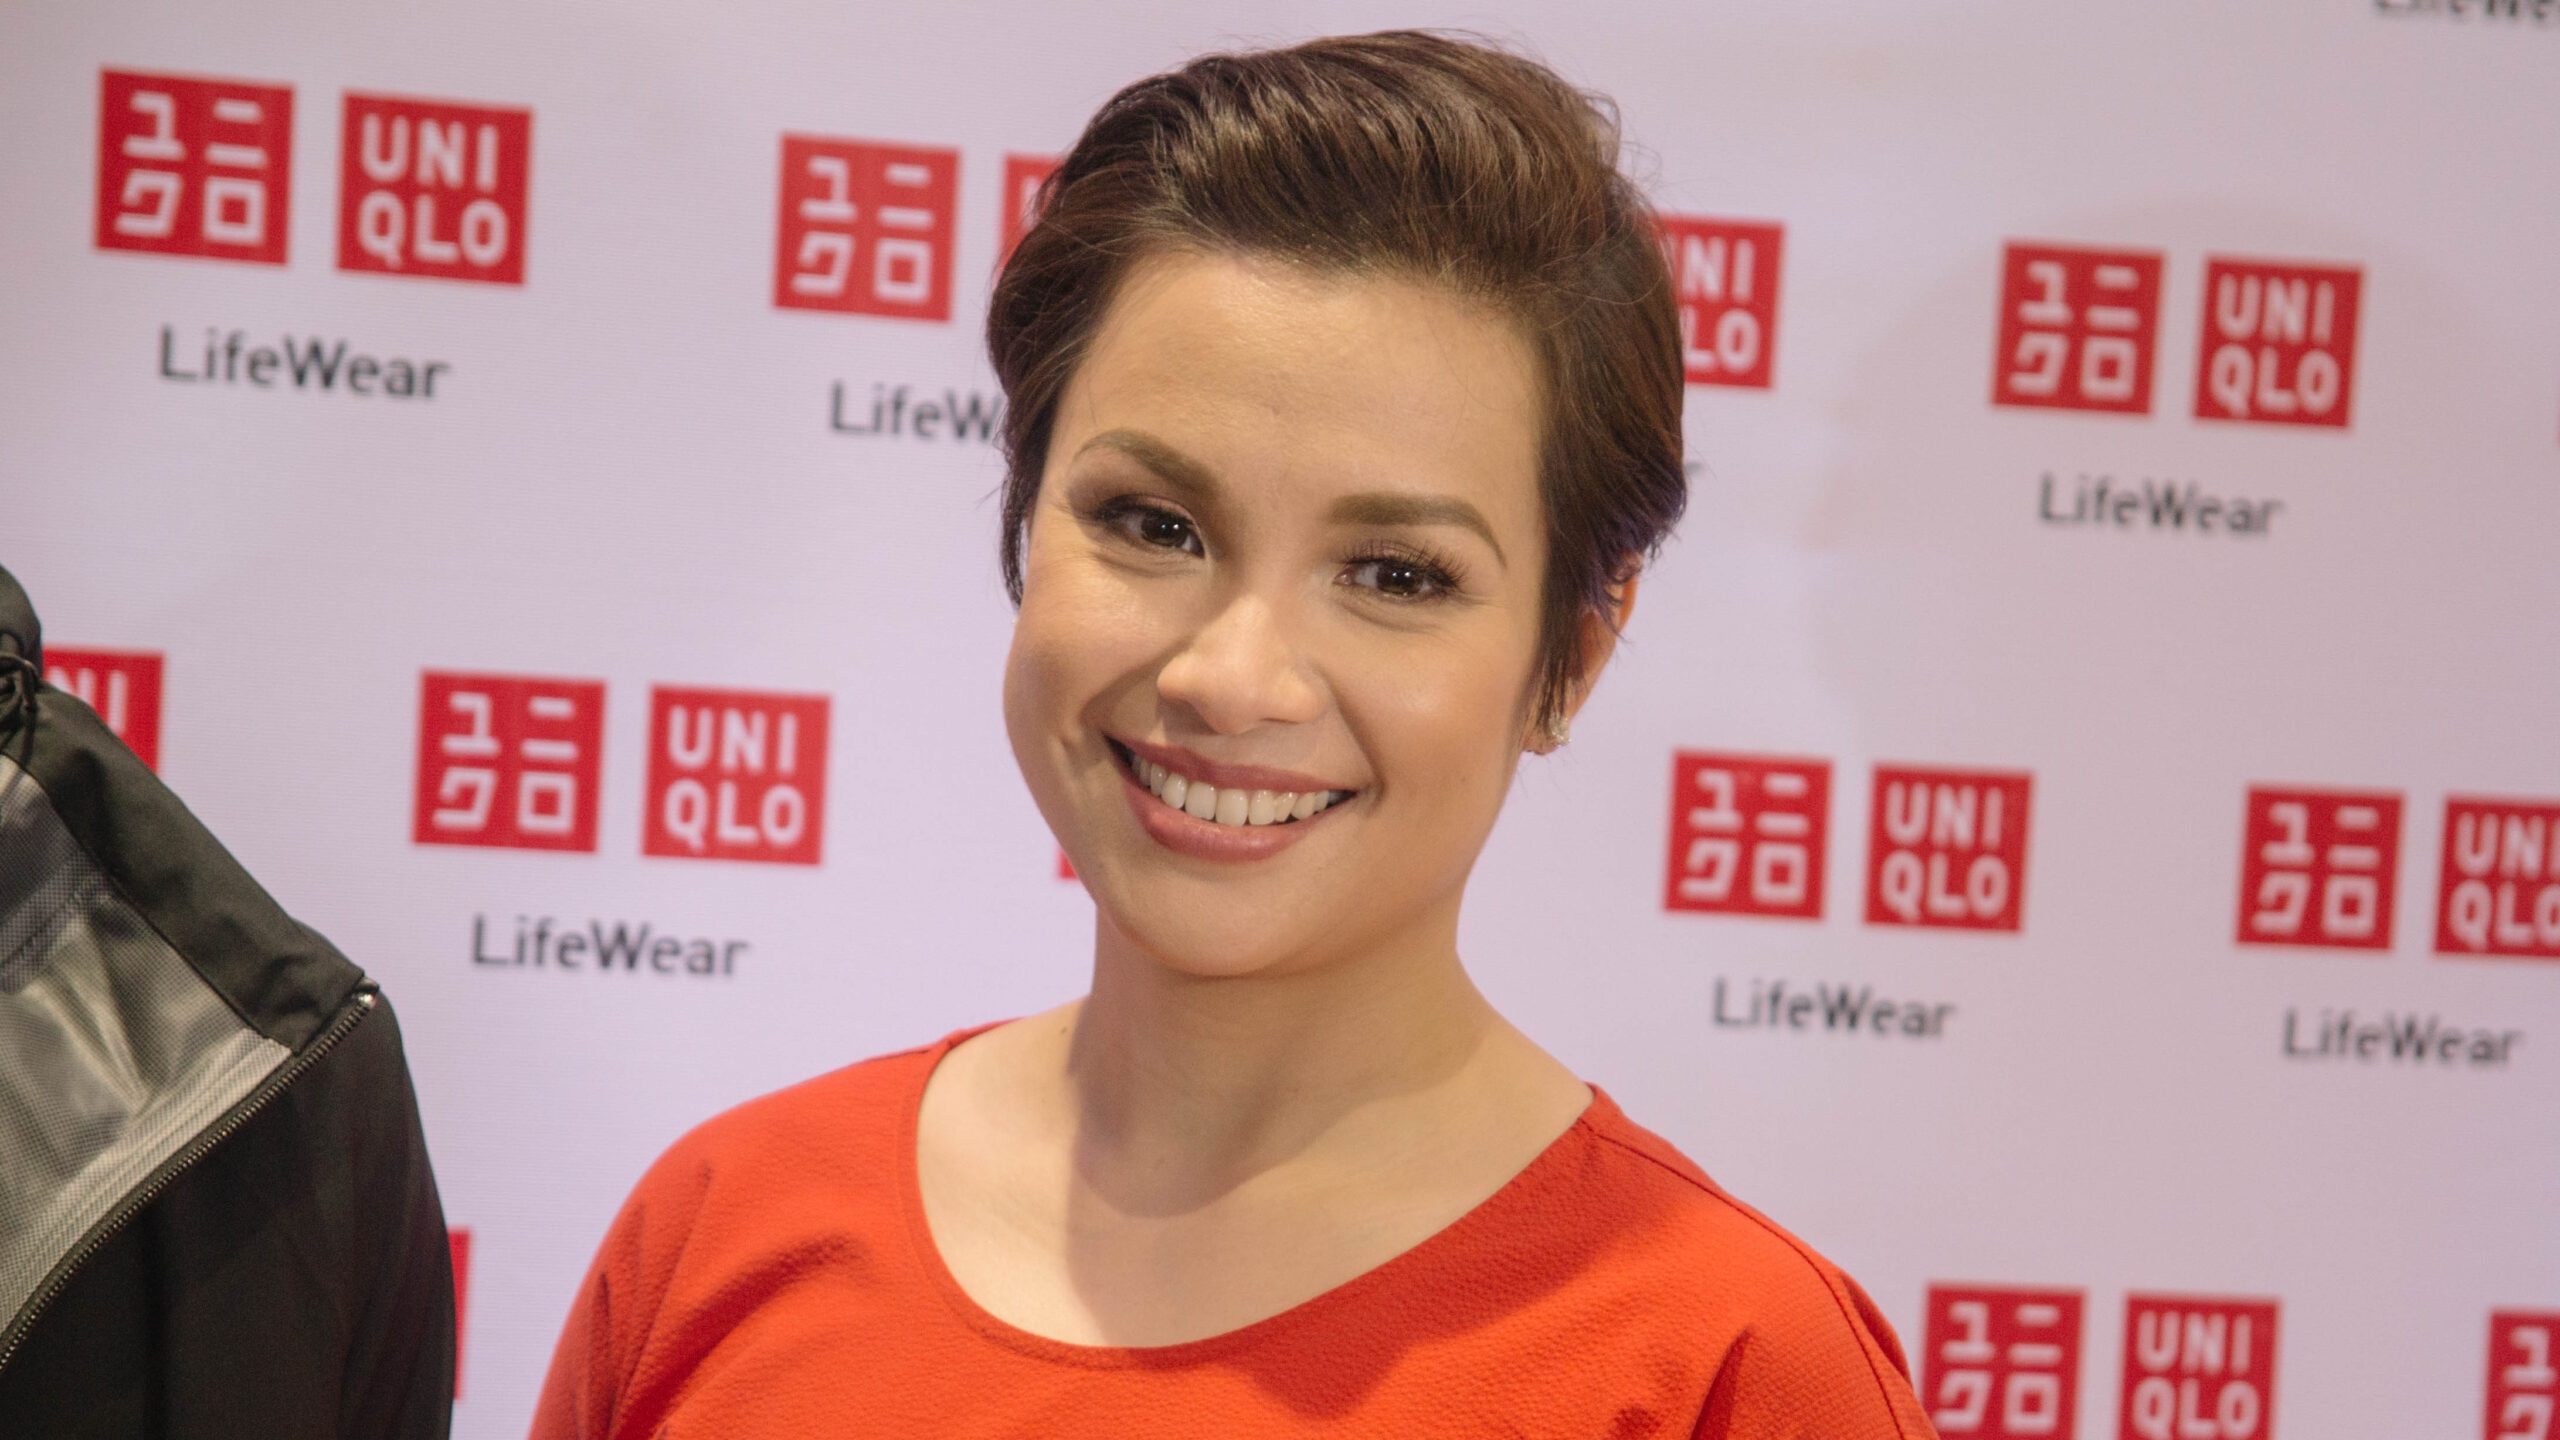 Lea Salonga on Esang de Torres: We will make things happen for her